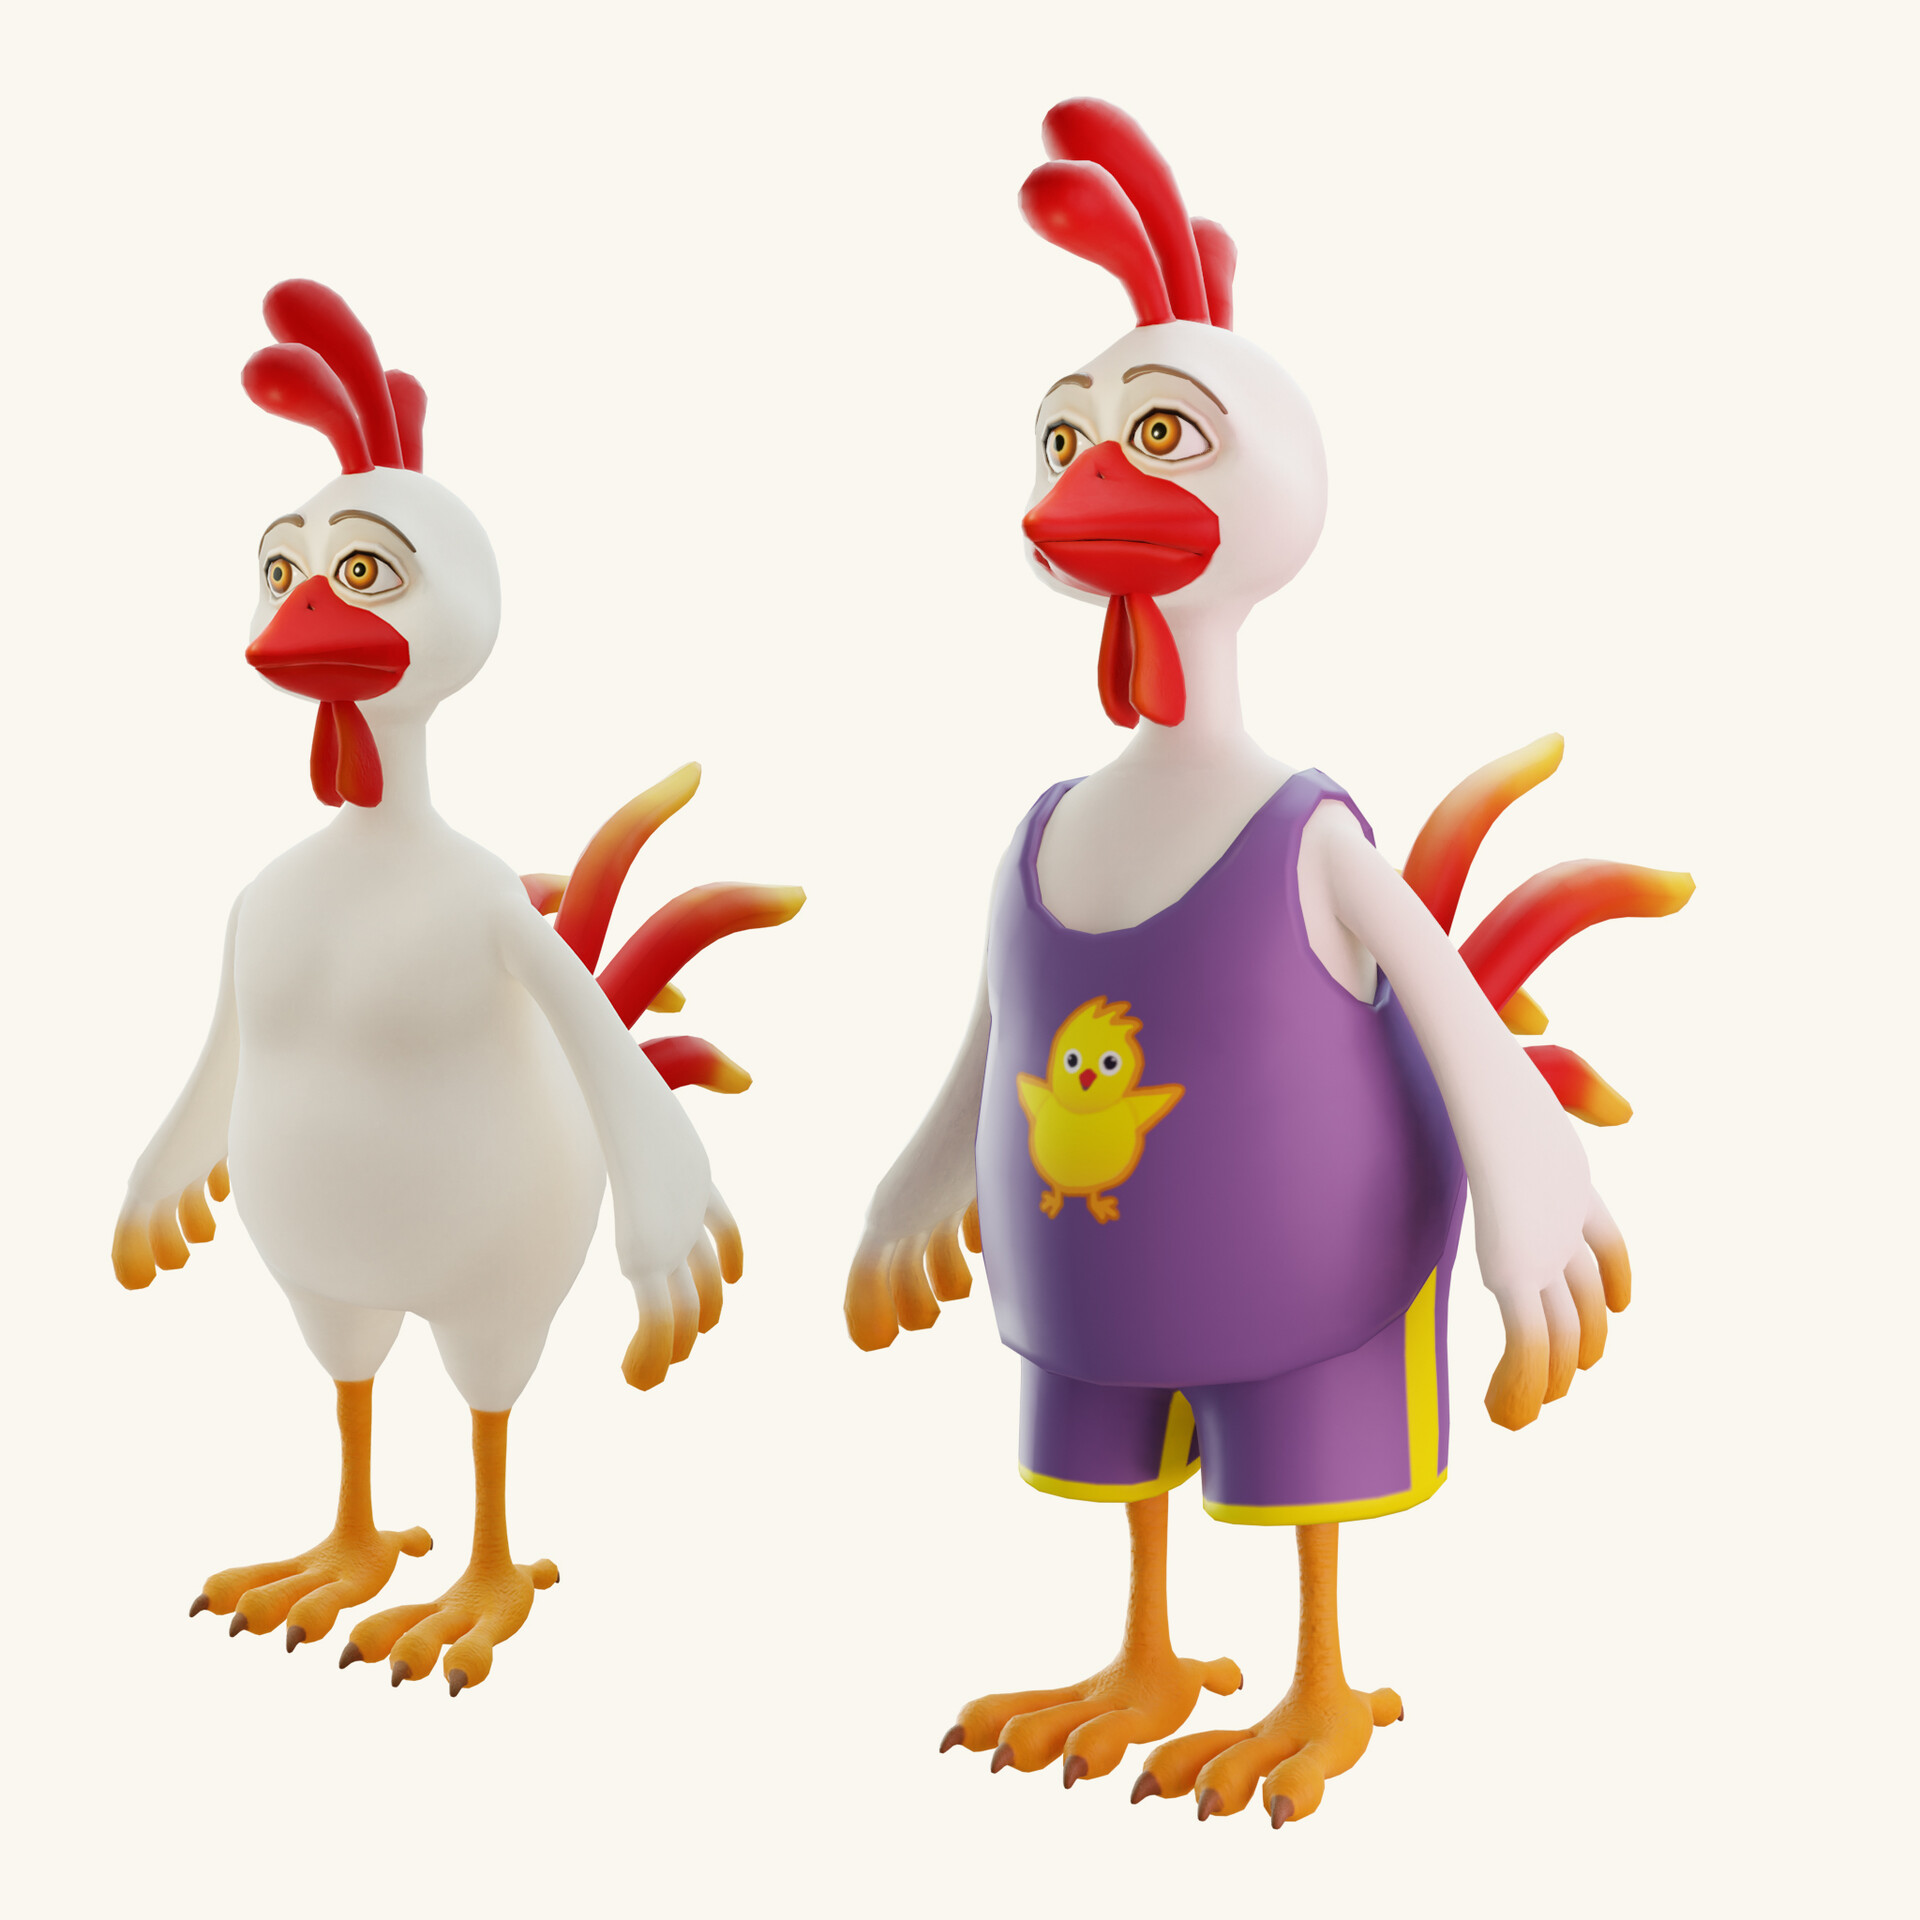 ArtStation - Stylized cartoon character rooster